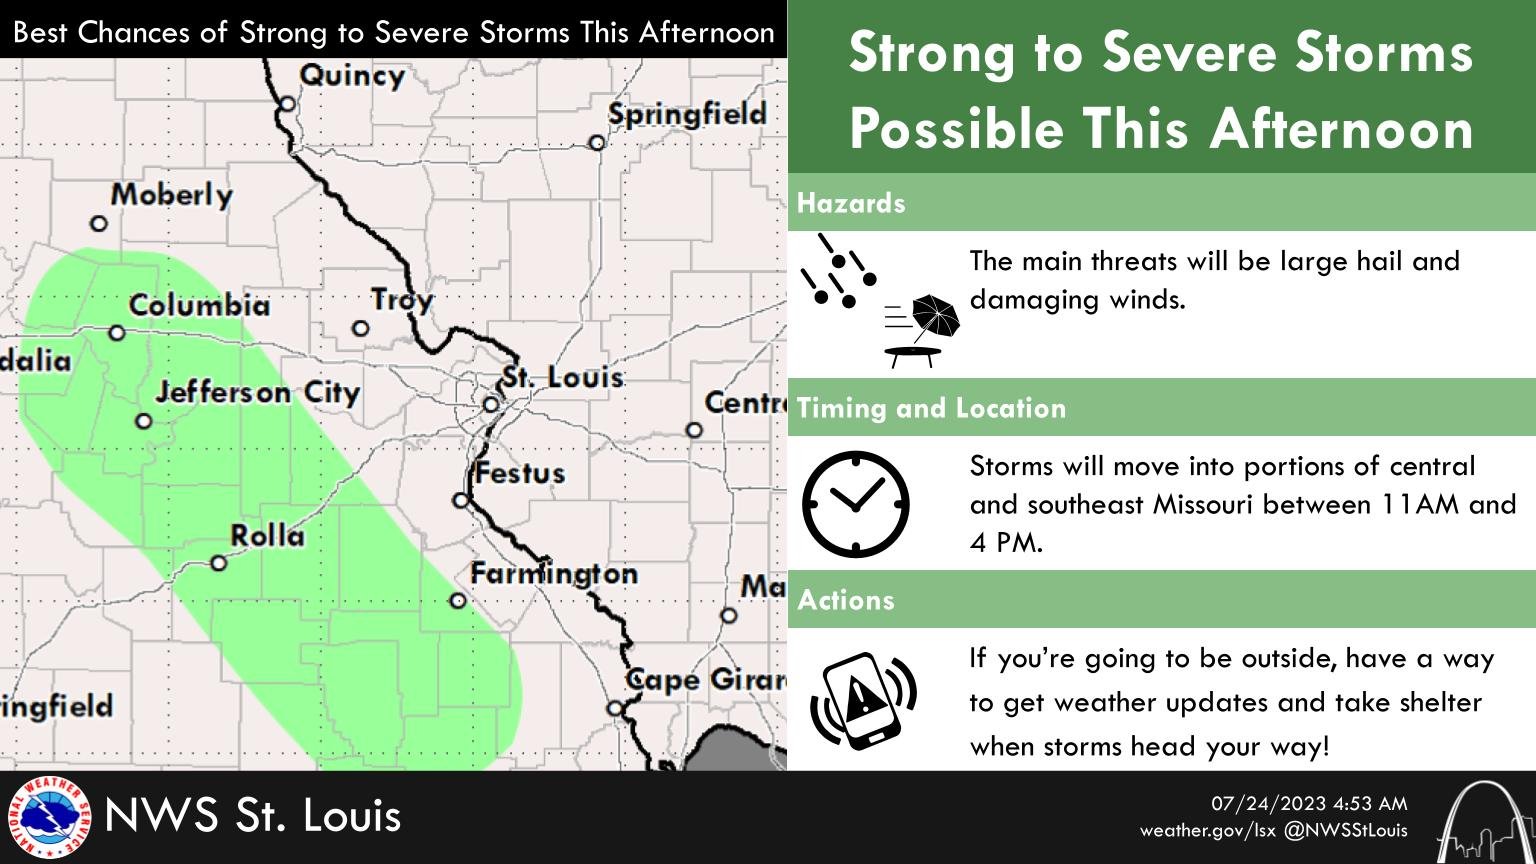 Mid-Missouri could see hail and damaging winds today